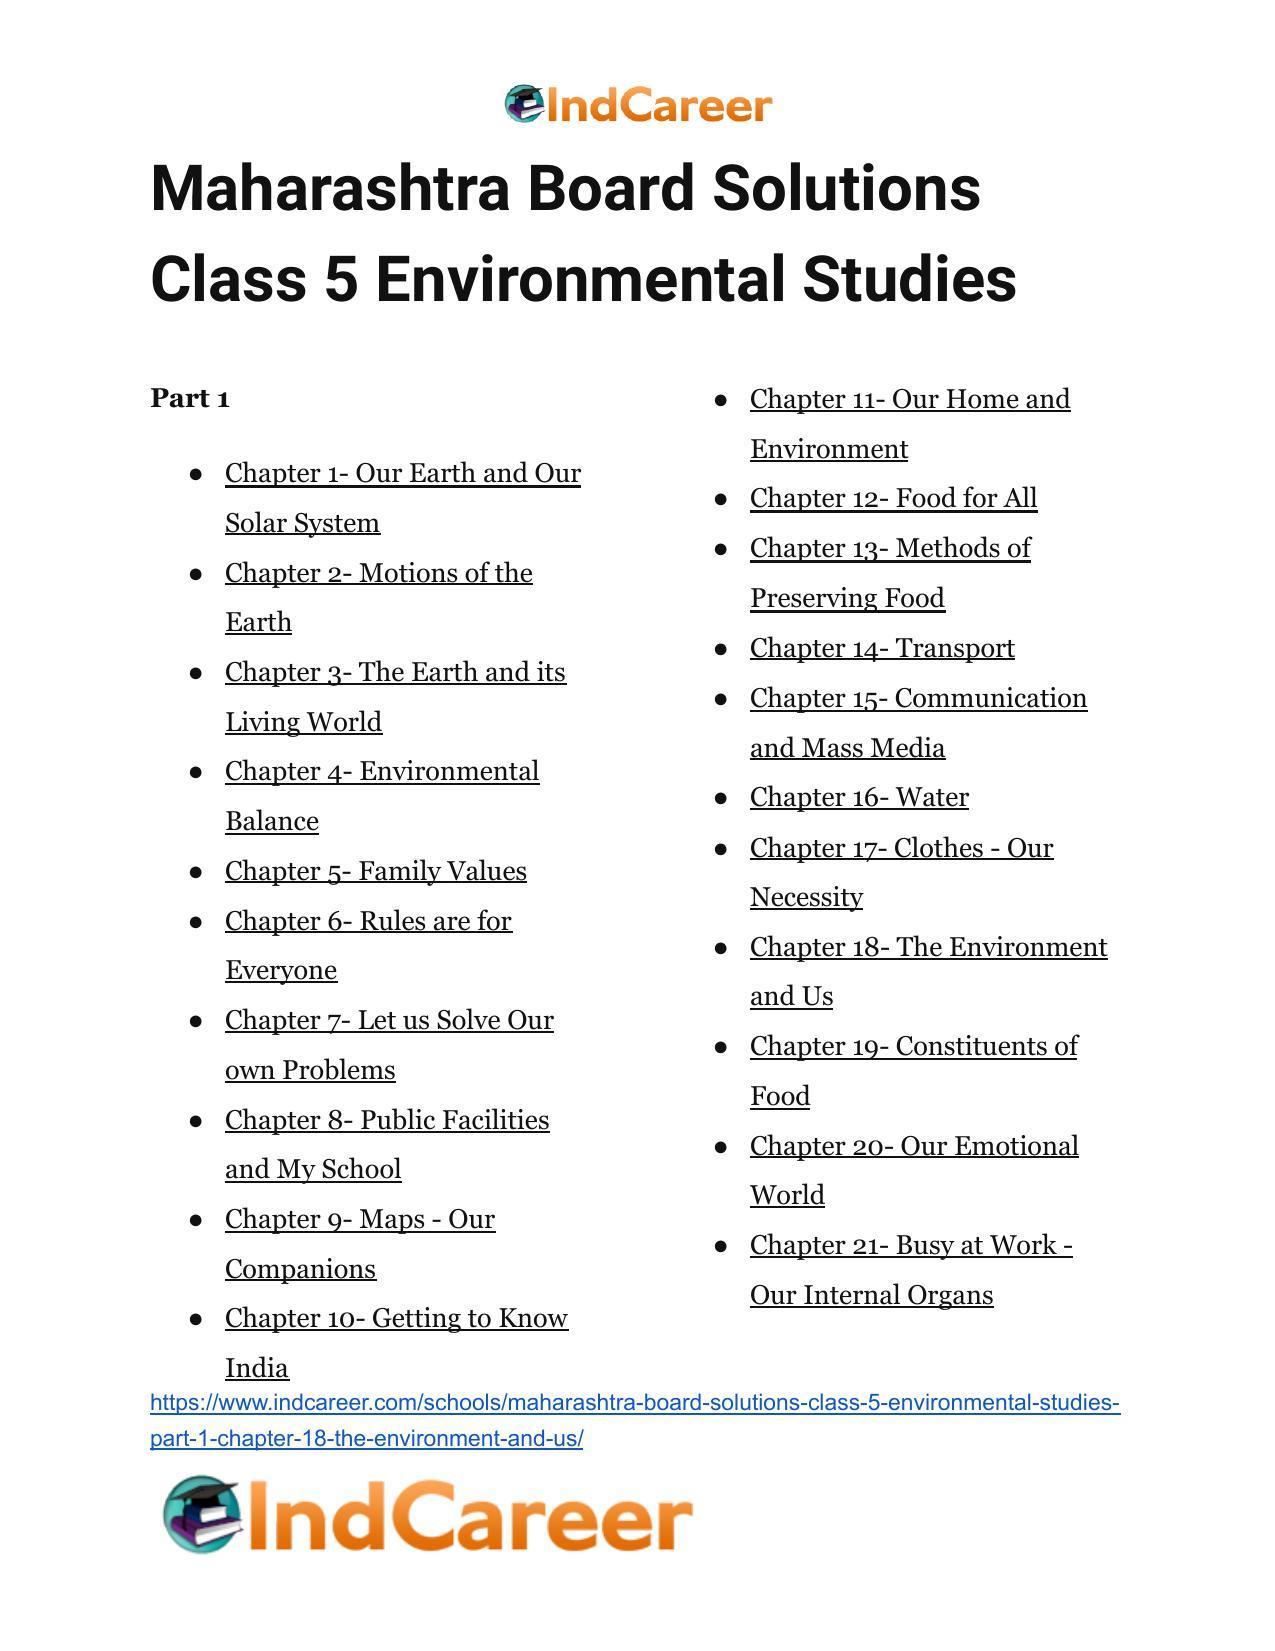 Maharashtra Board Solutions Class 5-Environmental Studies (Part 1): Chapter 18- The Environment and Us - Page 25